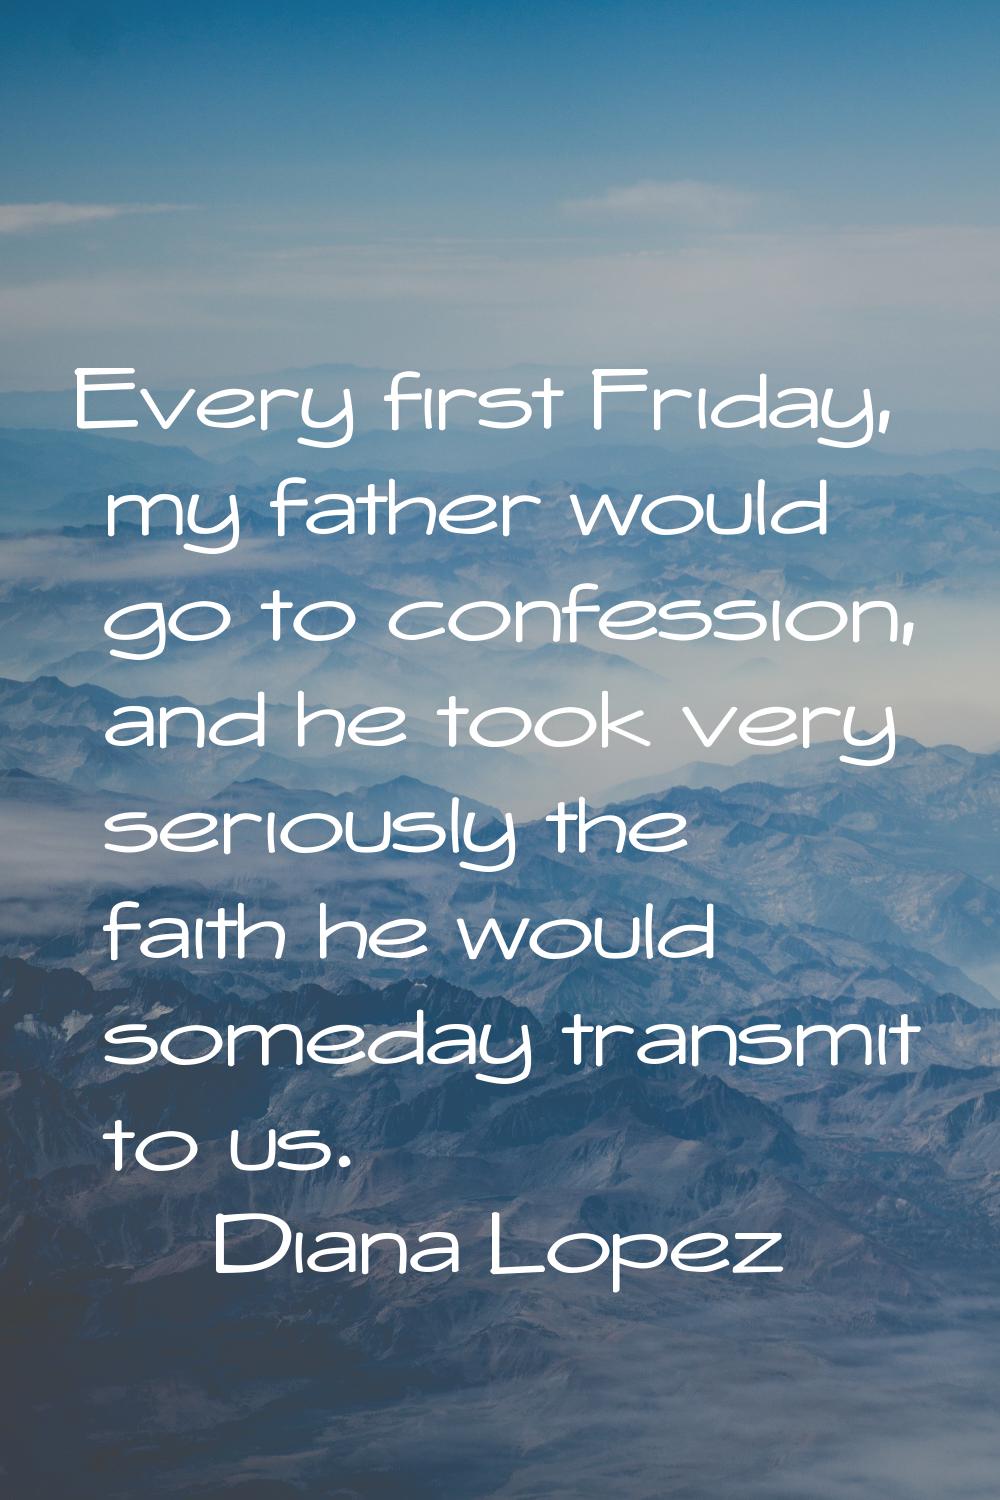 Every first Friday, my father would go to confession, and he took very seriously the faith he would